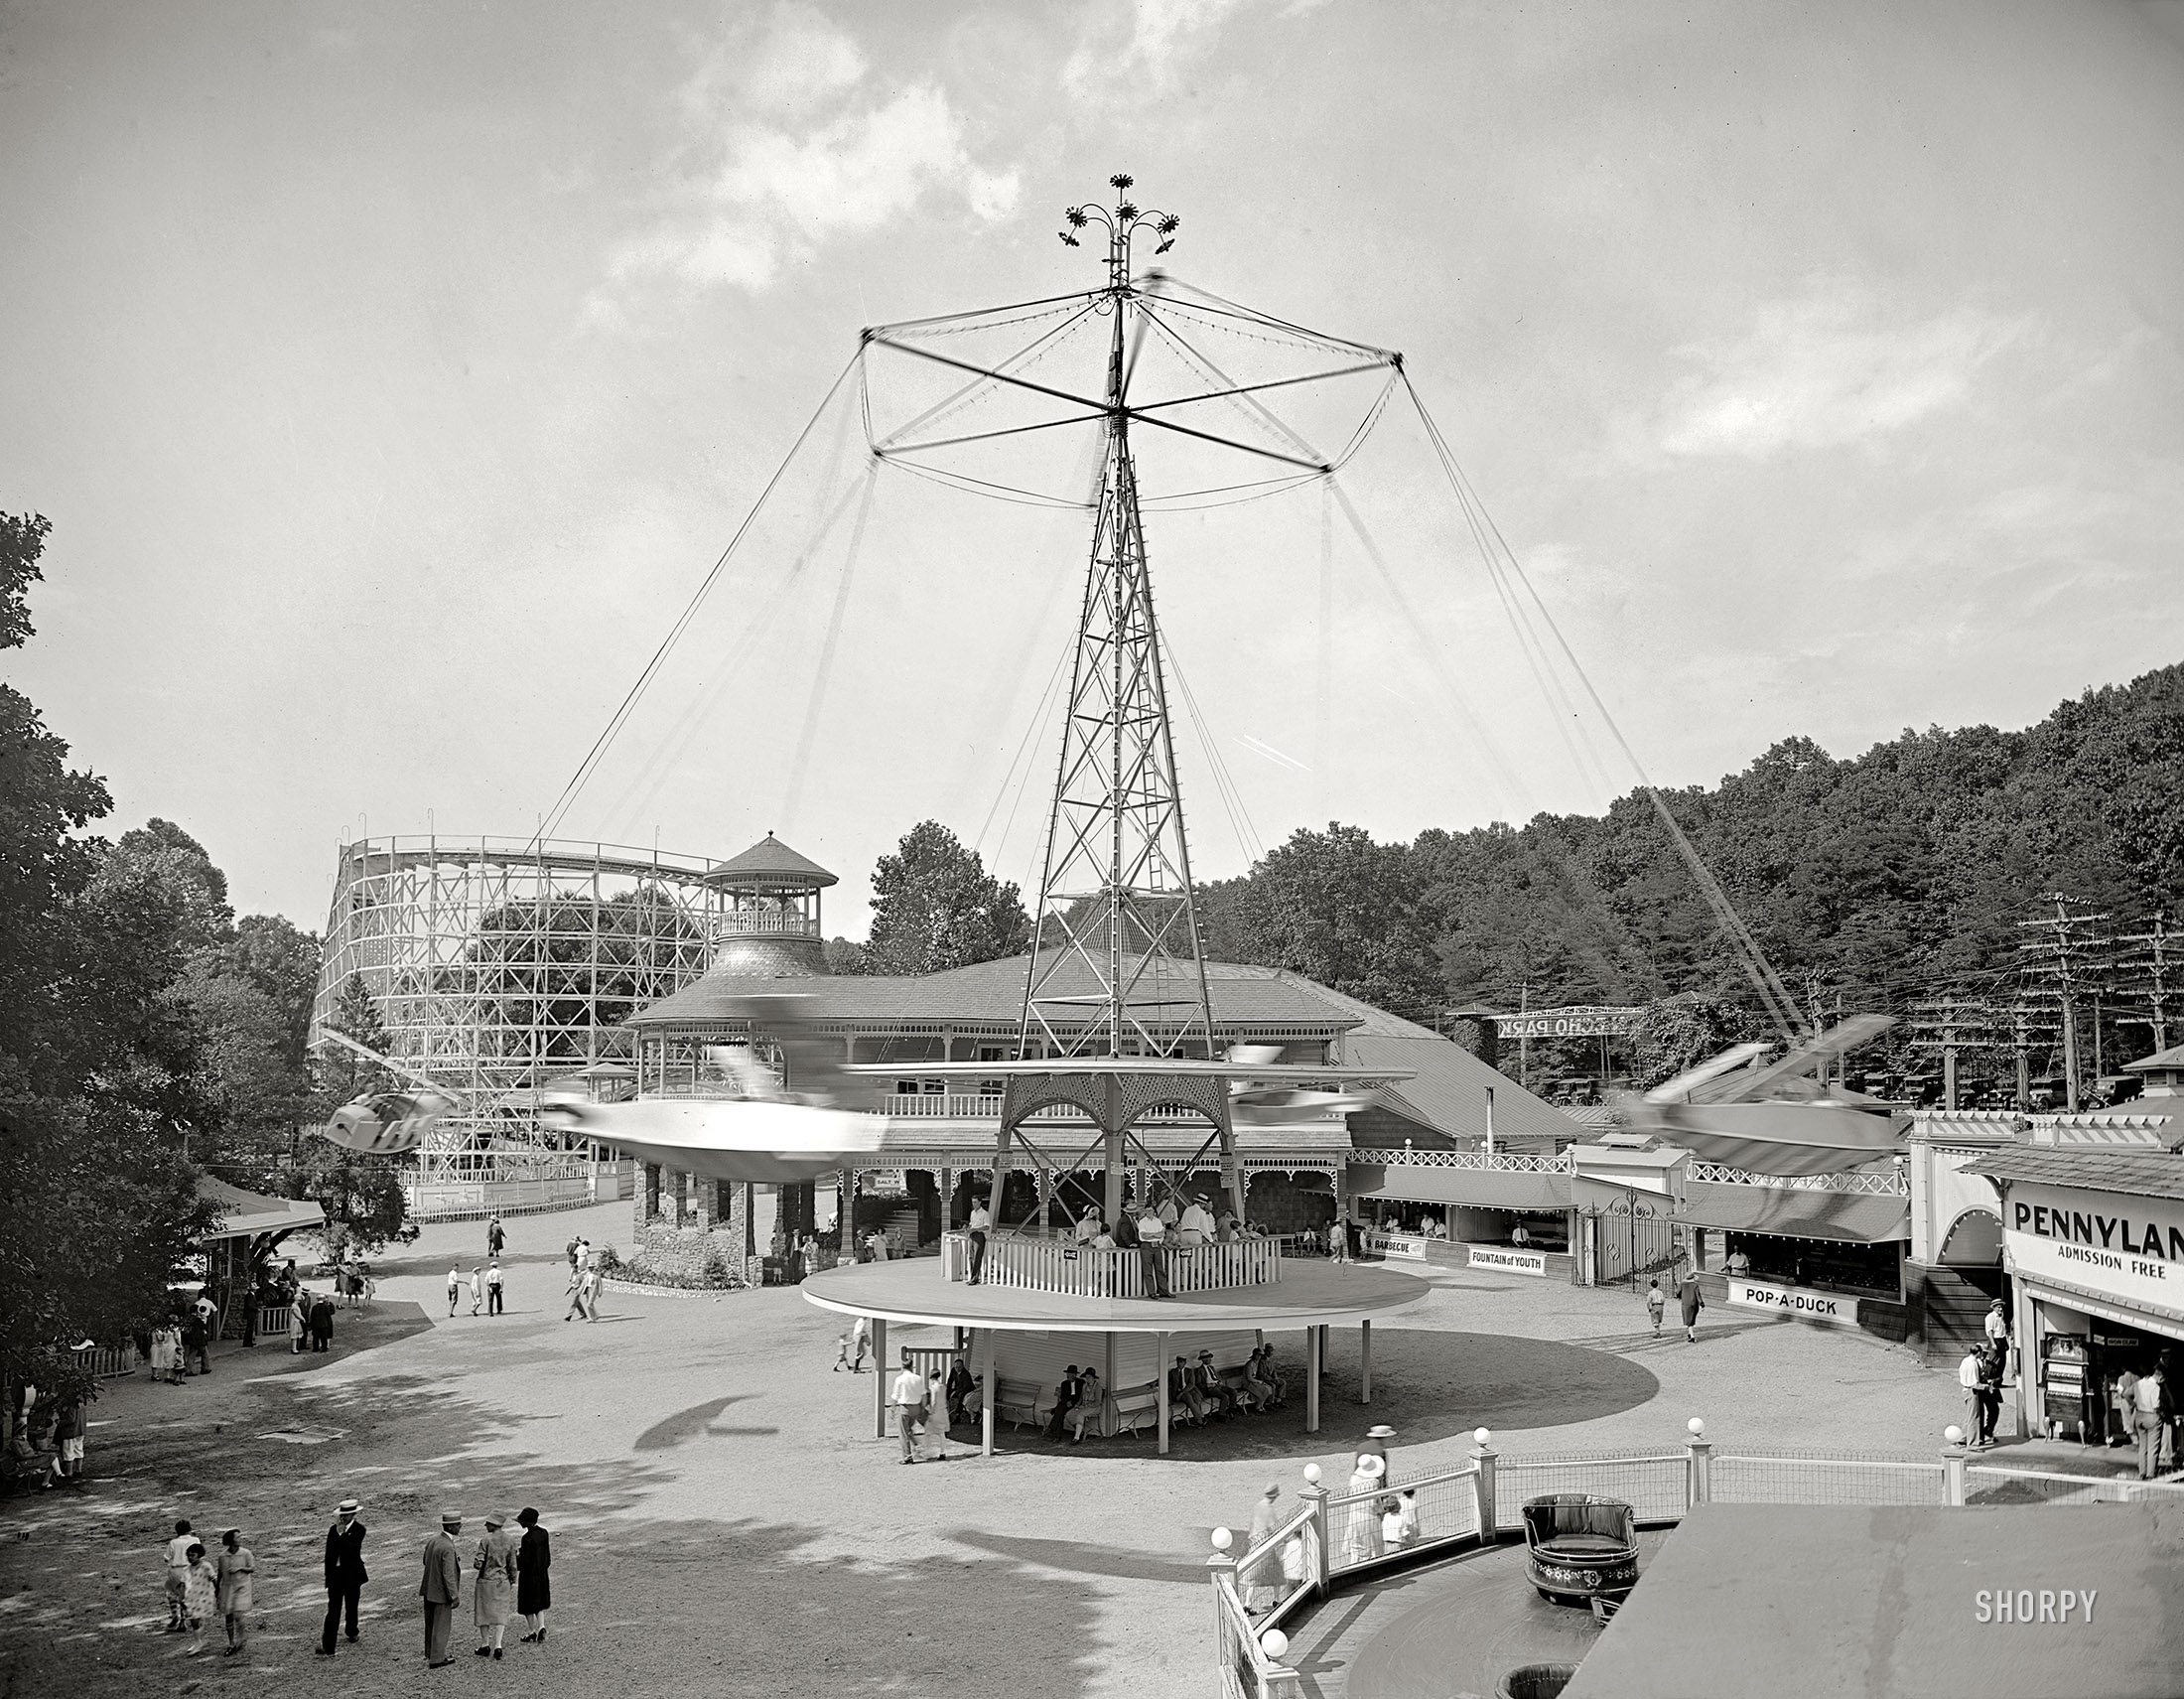 Montgomery County, Maryland, circa 1928. "Glen Echo Park." Another look at this old-school attraction in the Washington suburbs. View full size.